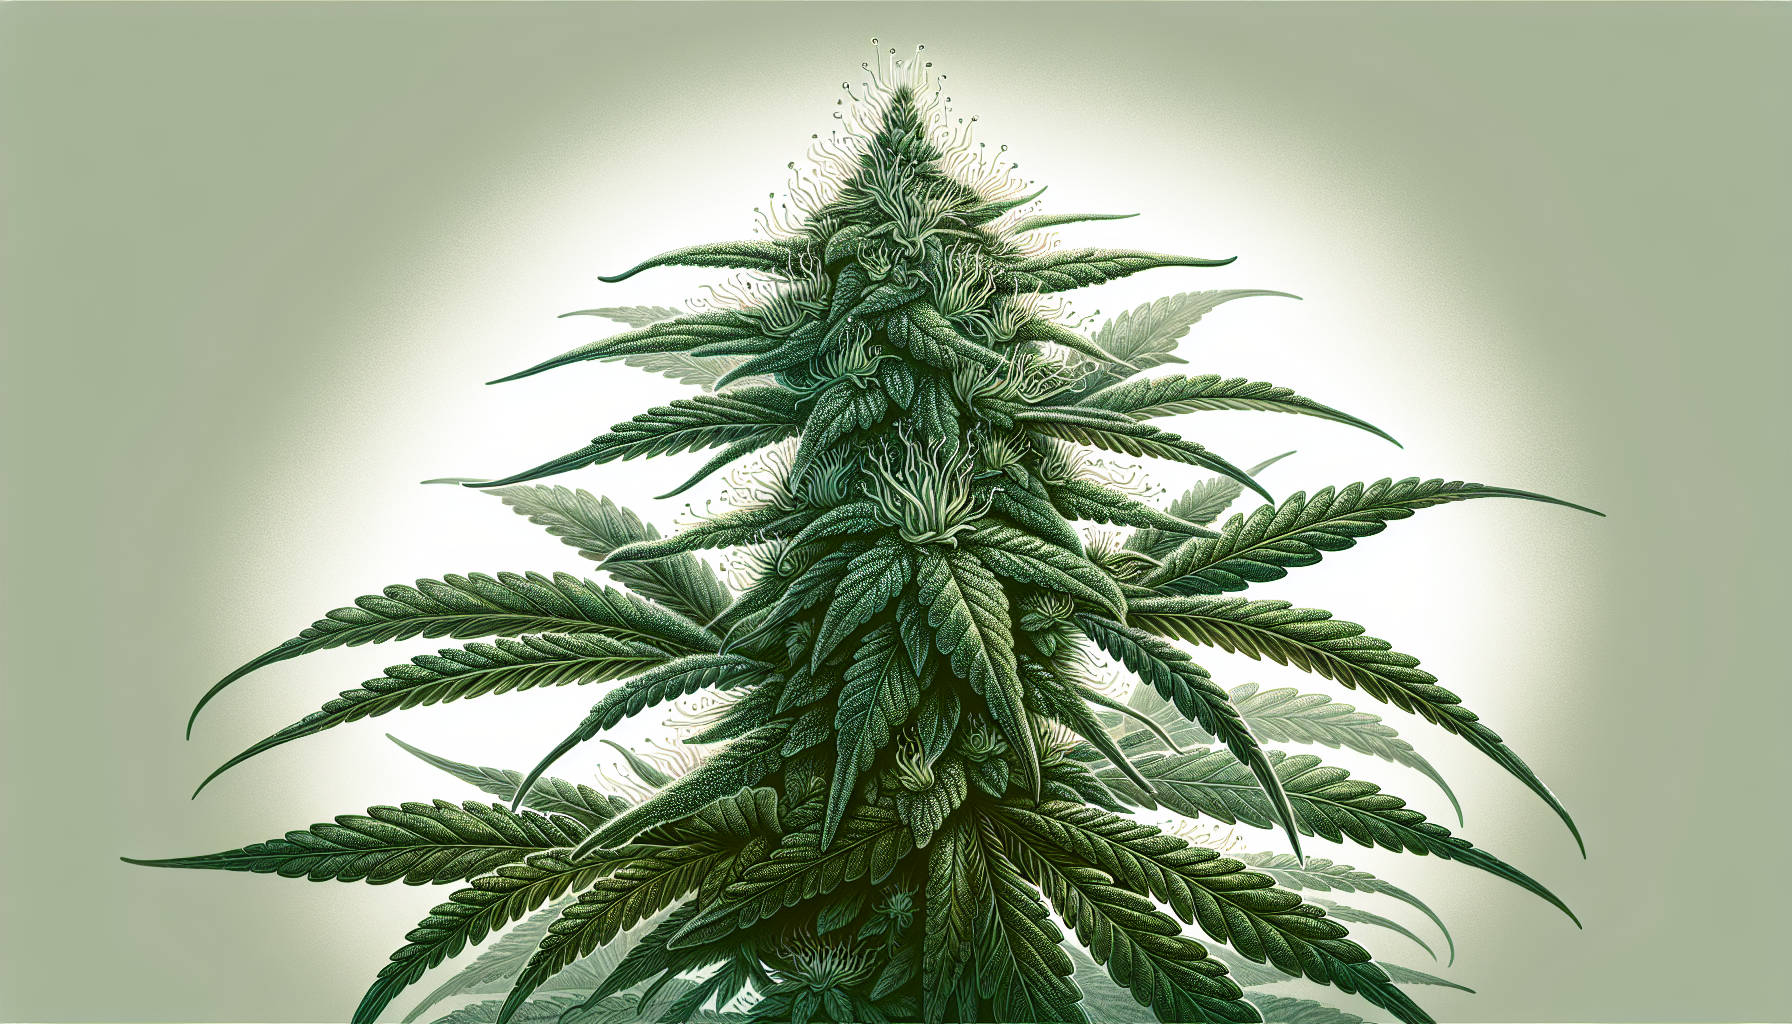 Illustration of cannabis plant with trichomes